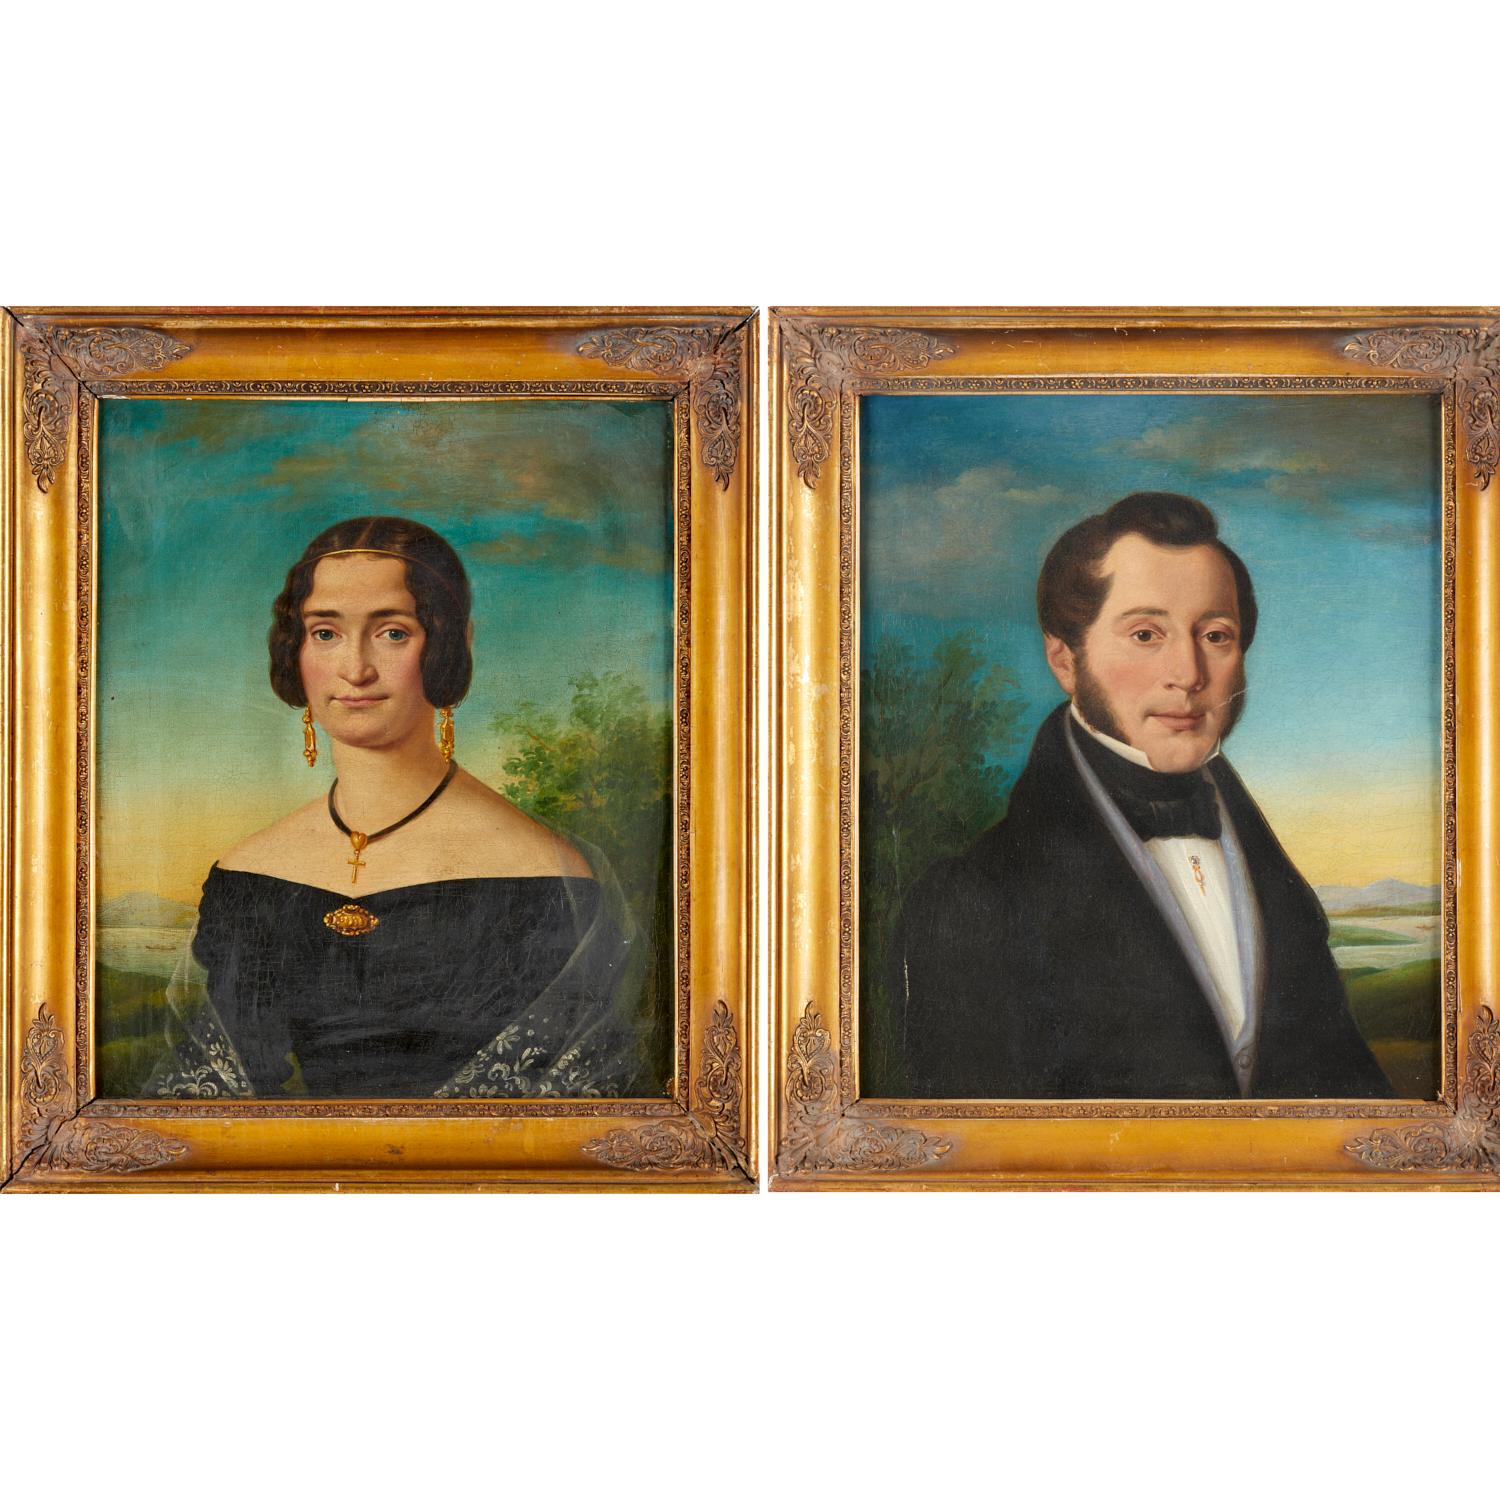 19th C. A Framed Pair of Regency English Portraits - Oil on Canvas For Sale 7